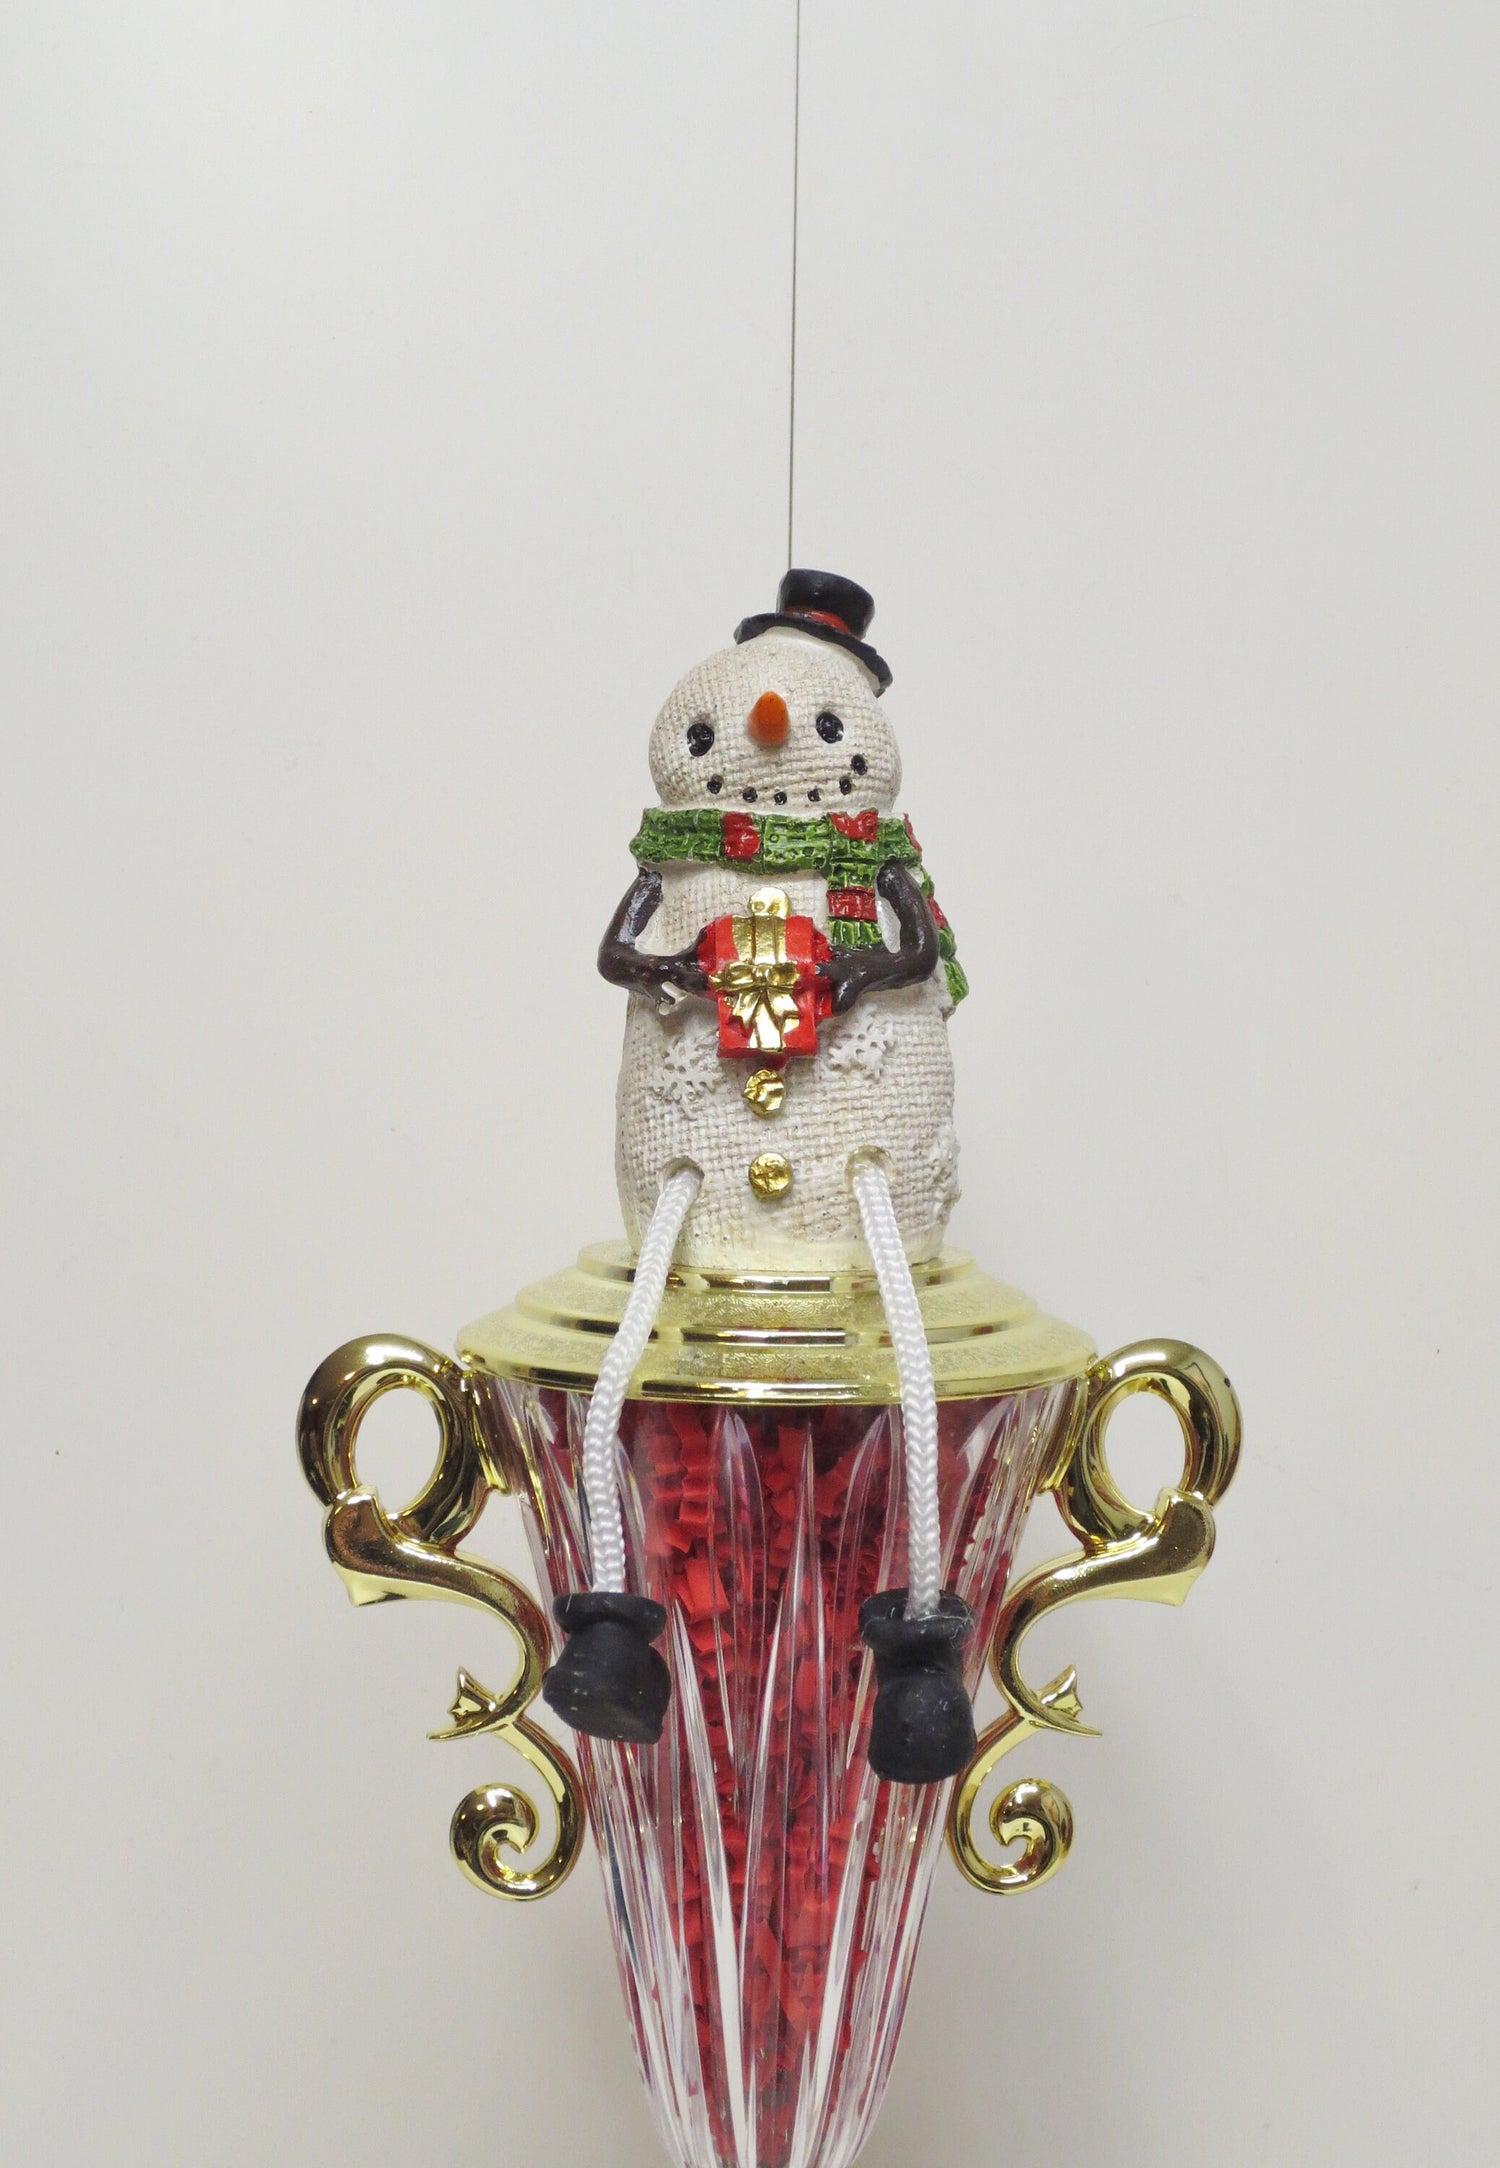 Ugliest Ugly Sweater Contest Trophy Christmas Snowman w Dangle Leg Holiday Decor Christmas Decor Kids Gingerbread Cookie Bake Off Winner